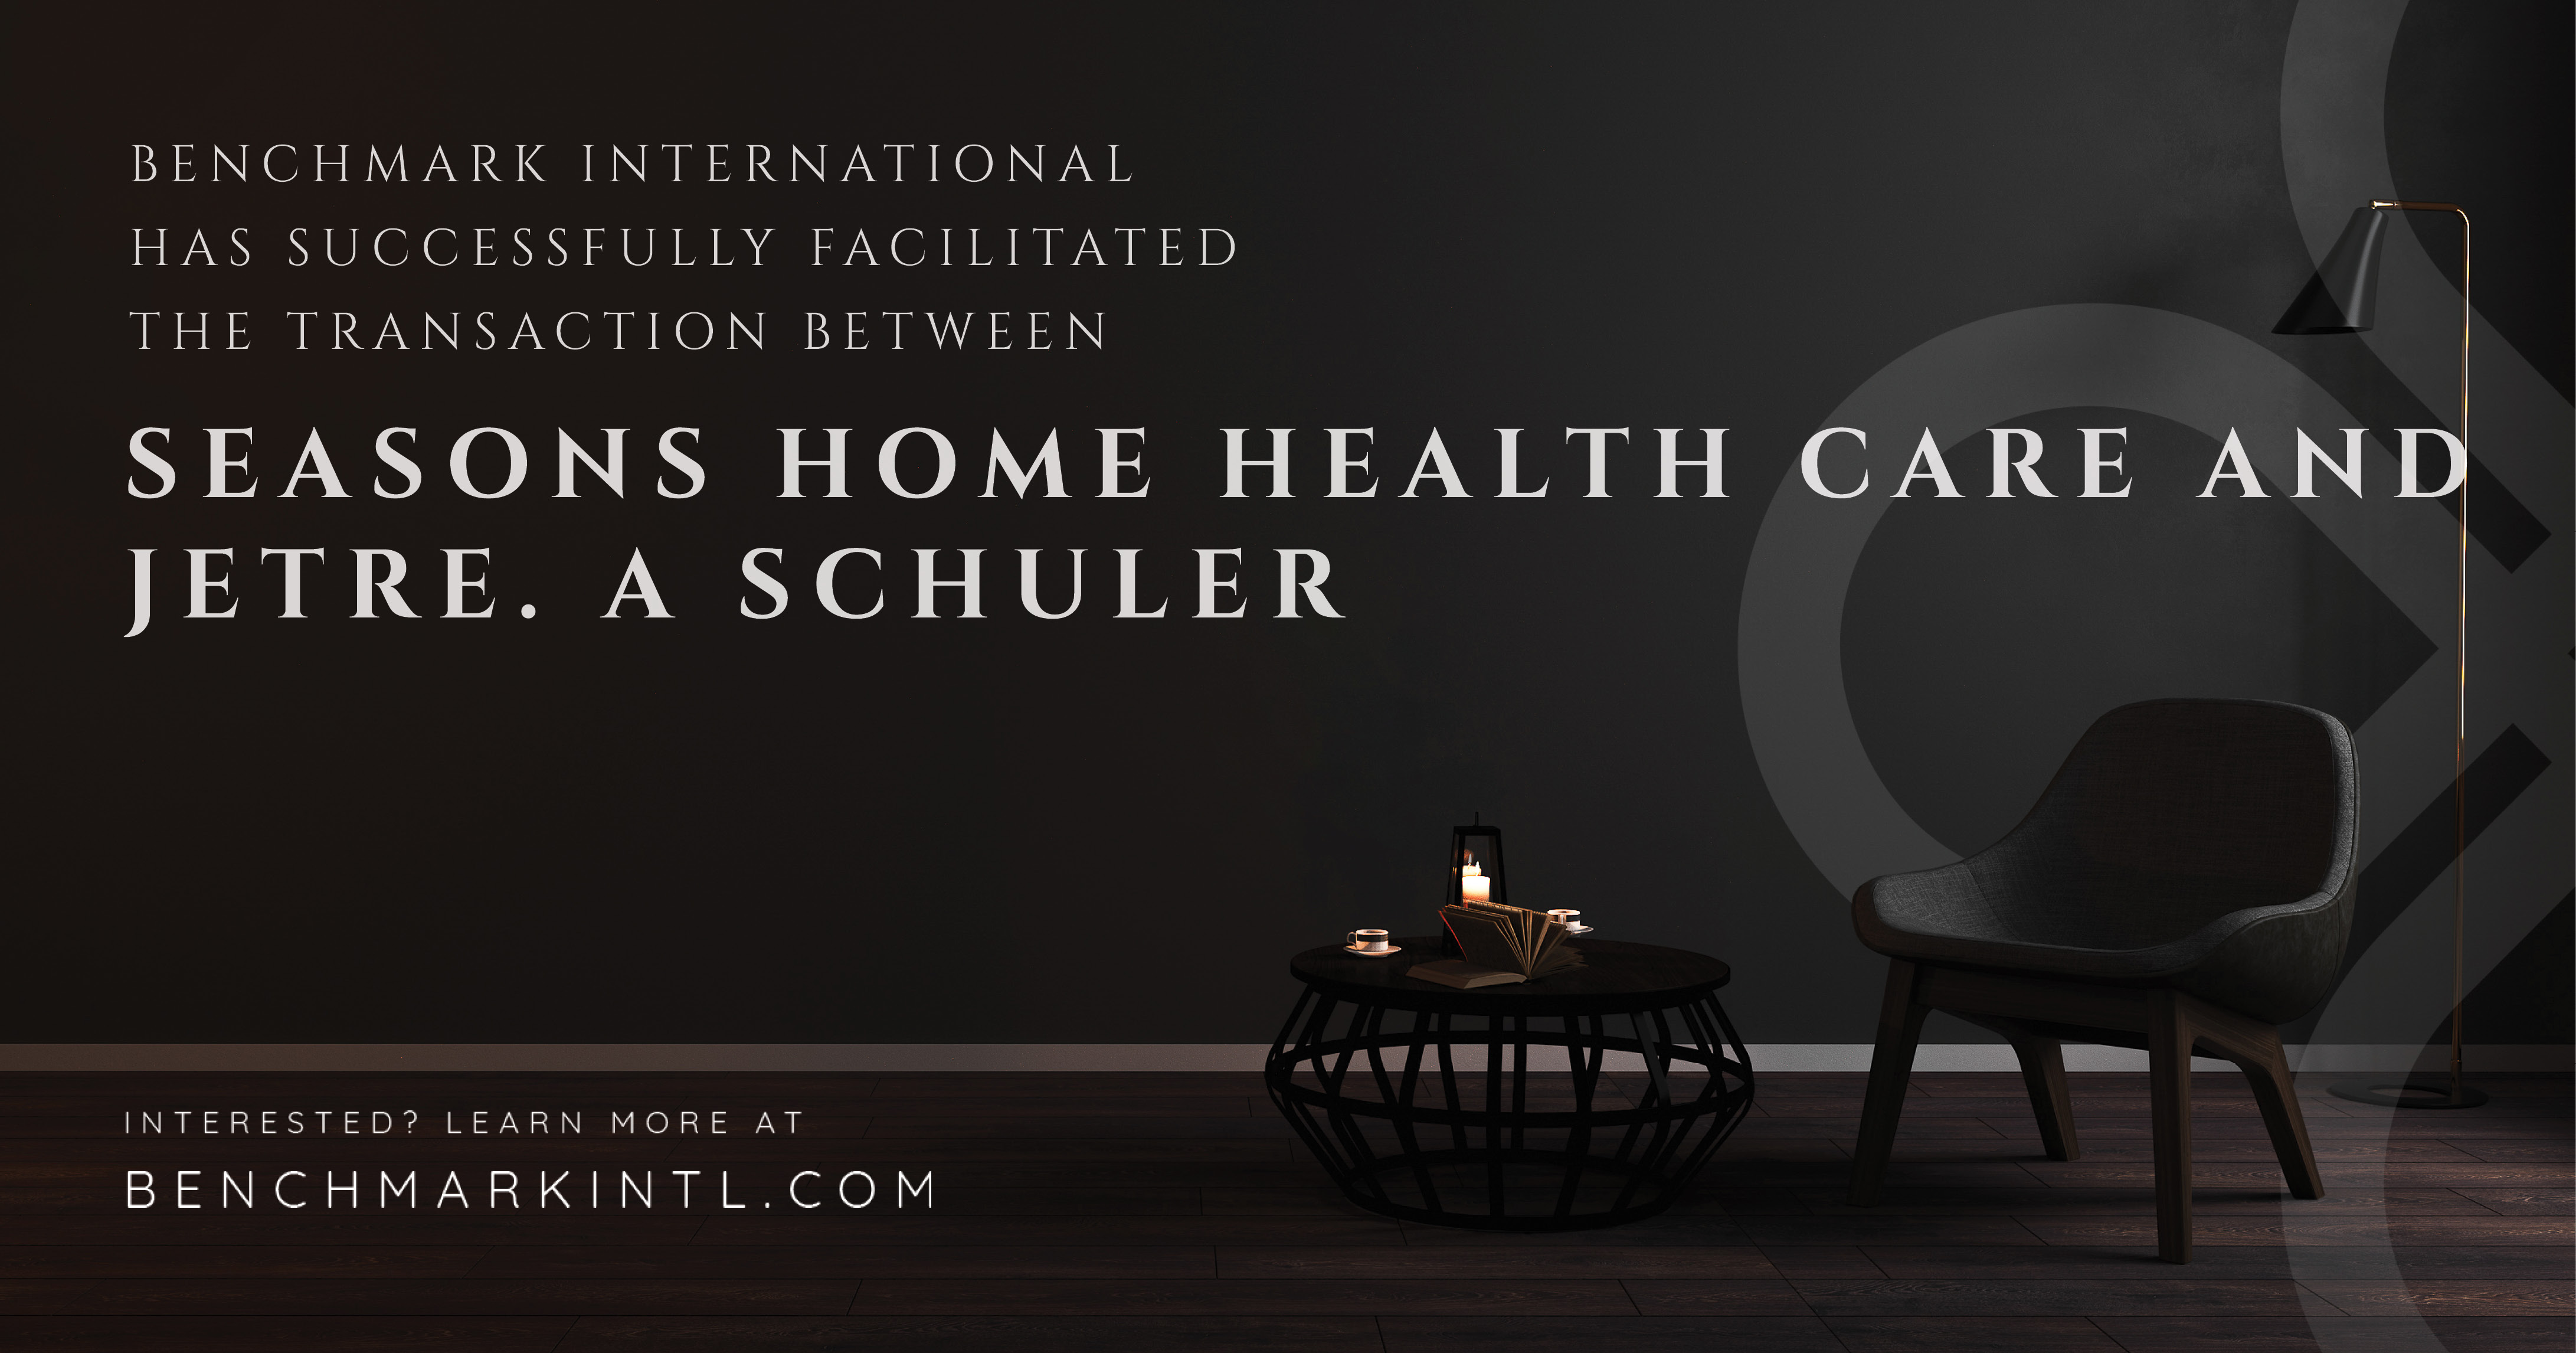 Benchmark International Facilitated The Transaction Of Seasons Home Health Care And Jetre. A Schuler